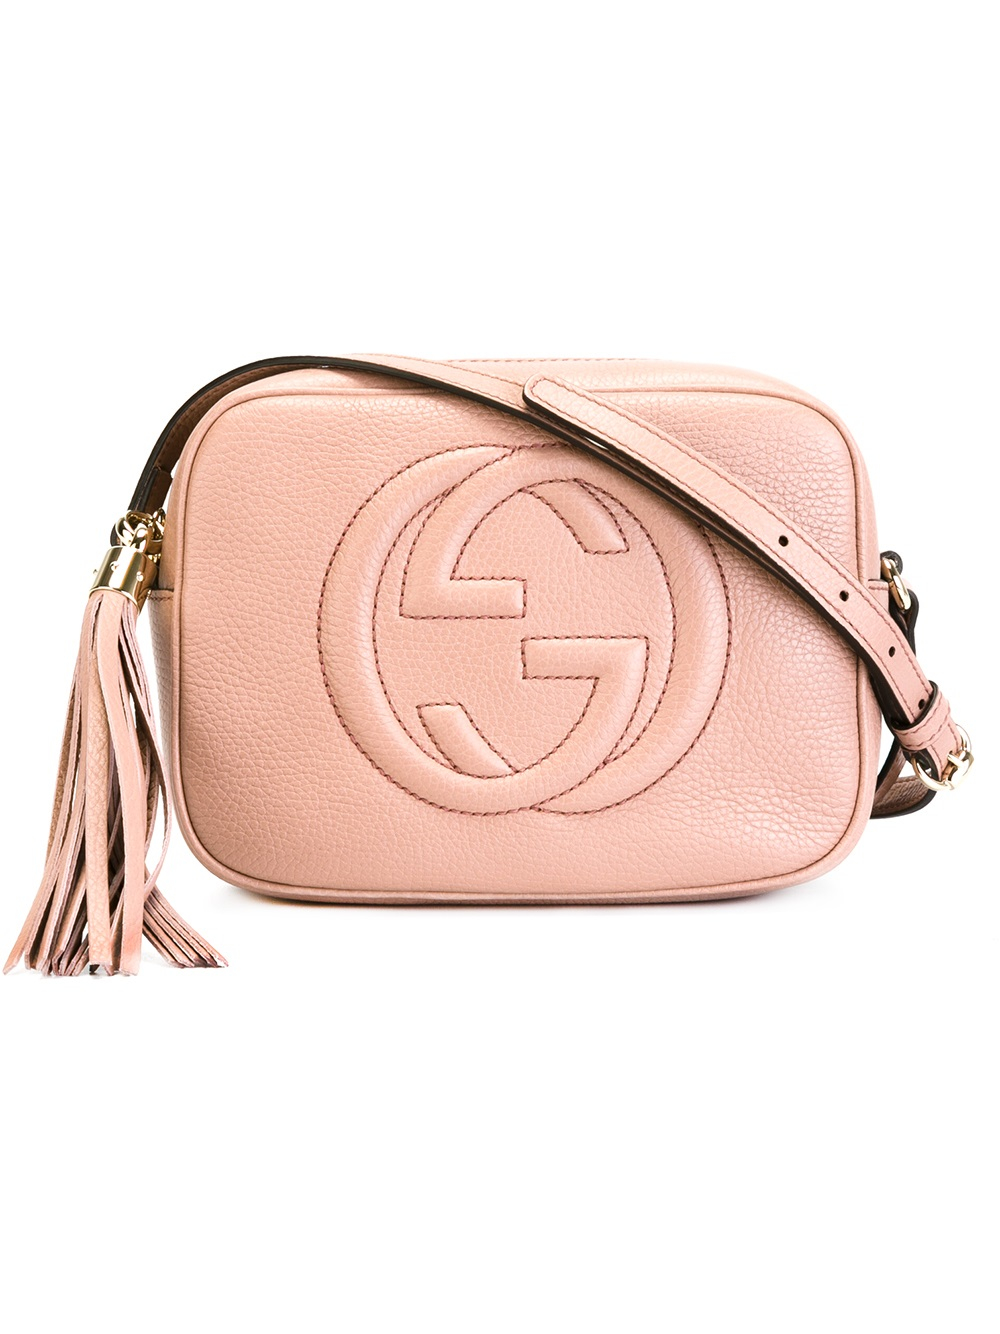 Gucci Disco Bag Soho in Pink - Lyst